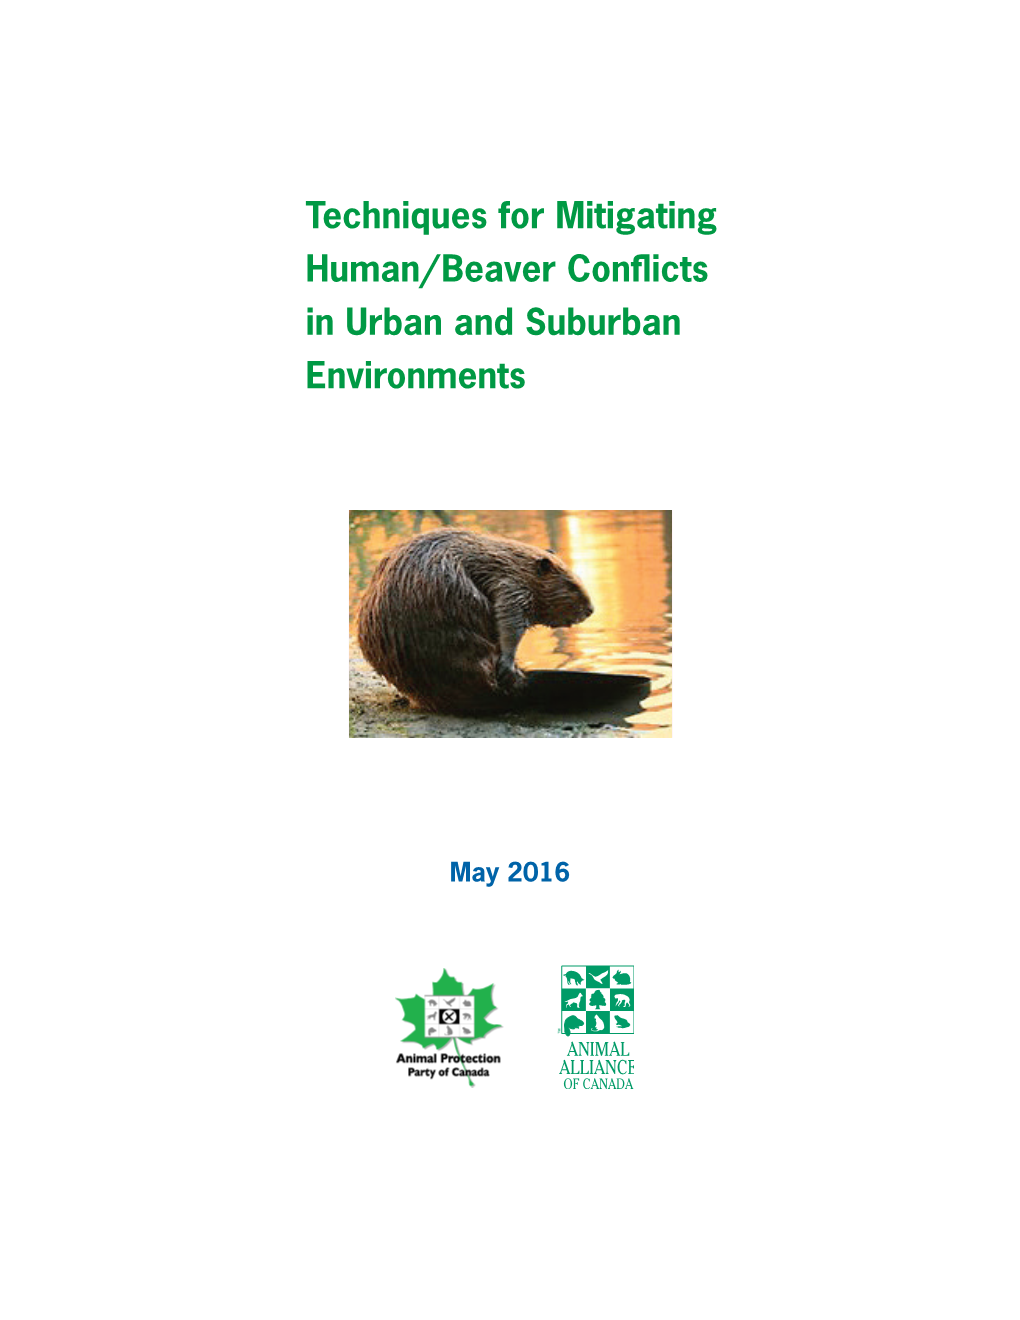 Techniques for Mitigating Human/Beaver Conflicts in Urban and Suburban Environments